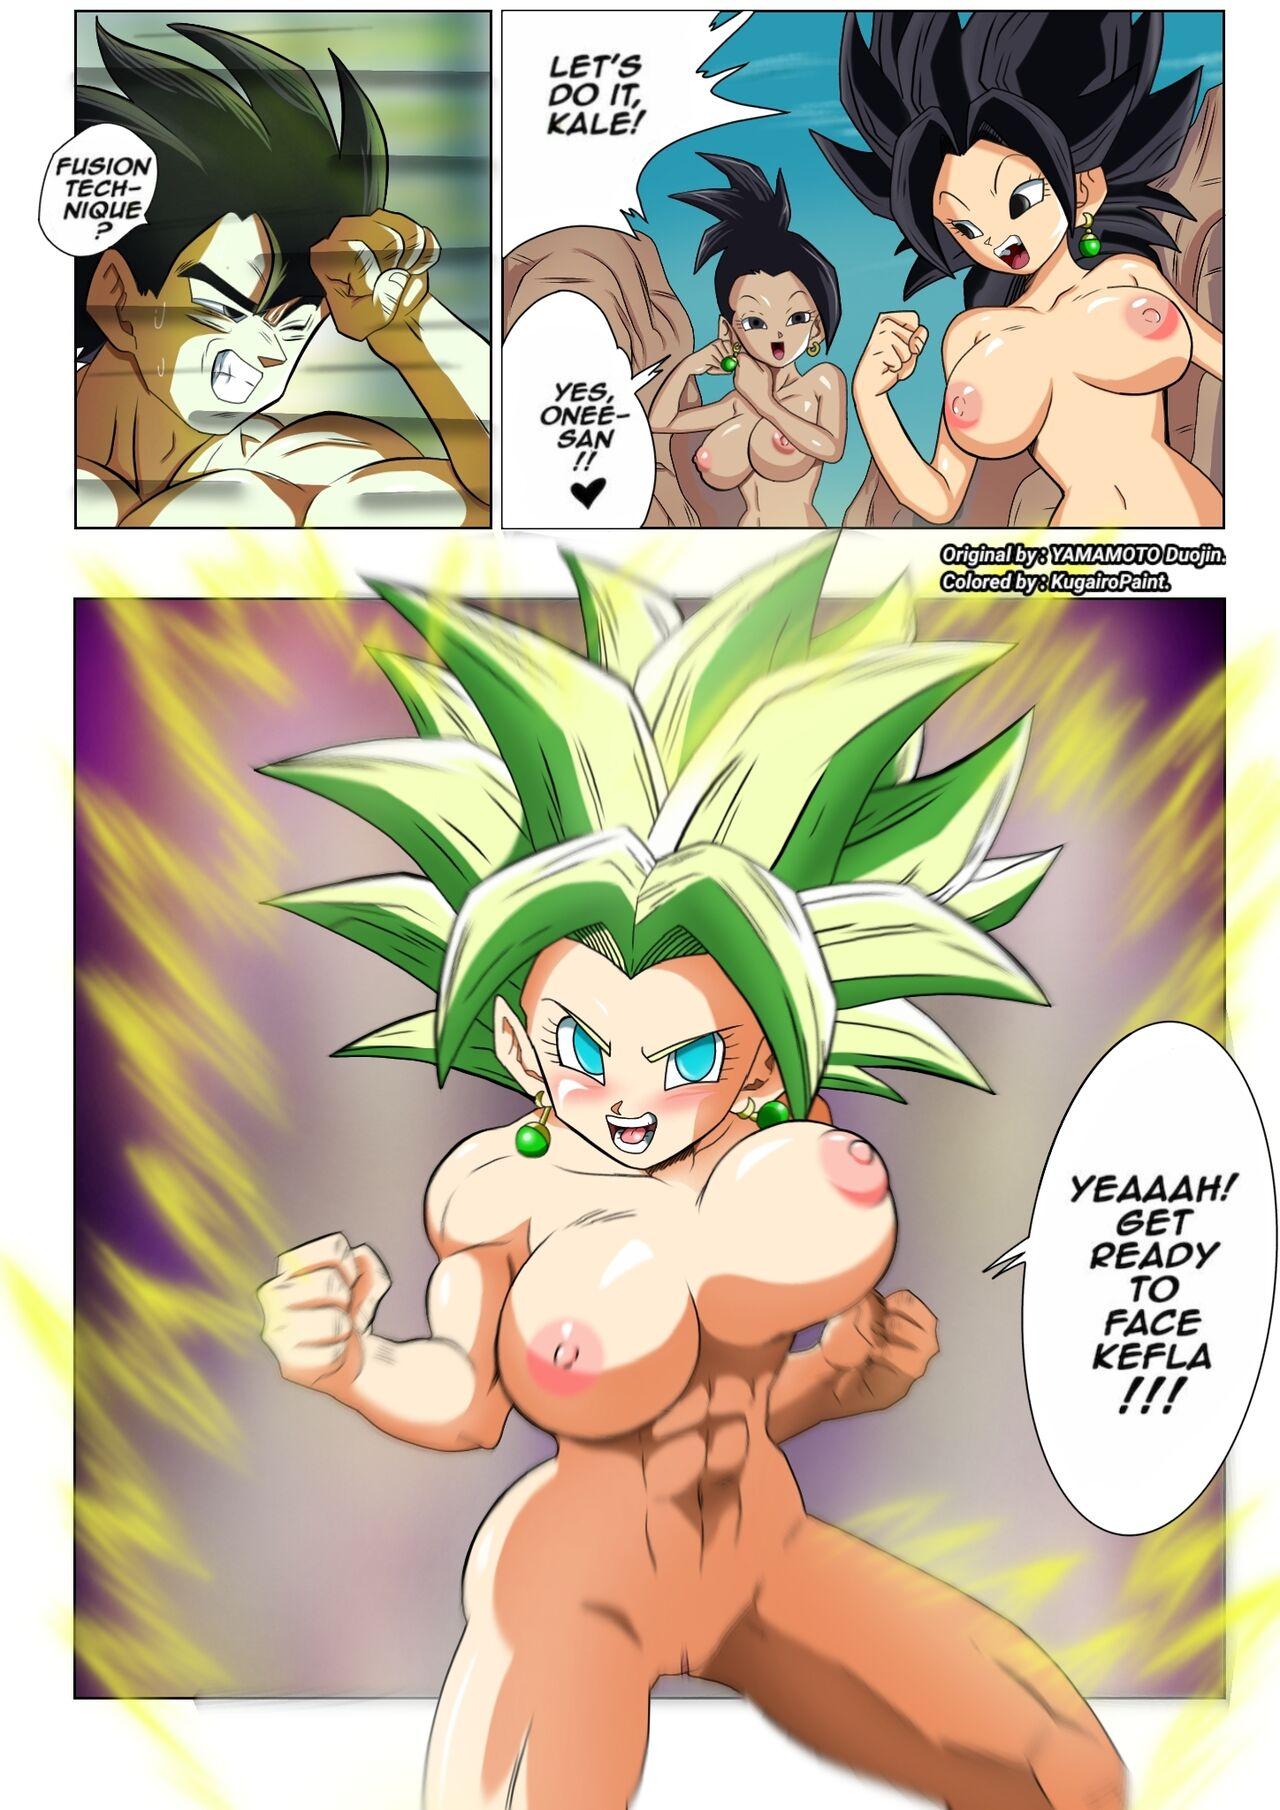 Tiny Fight in the 6th Universe!! - Dragon ball super Taiwan - Page 9